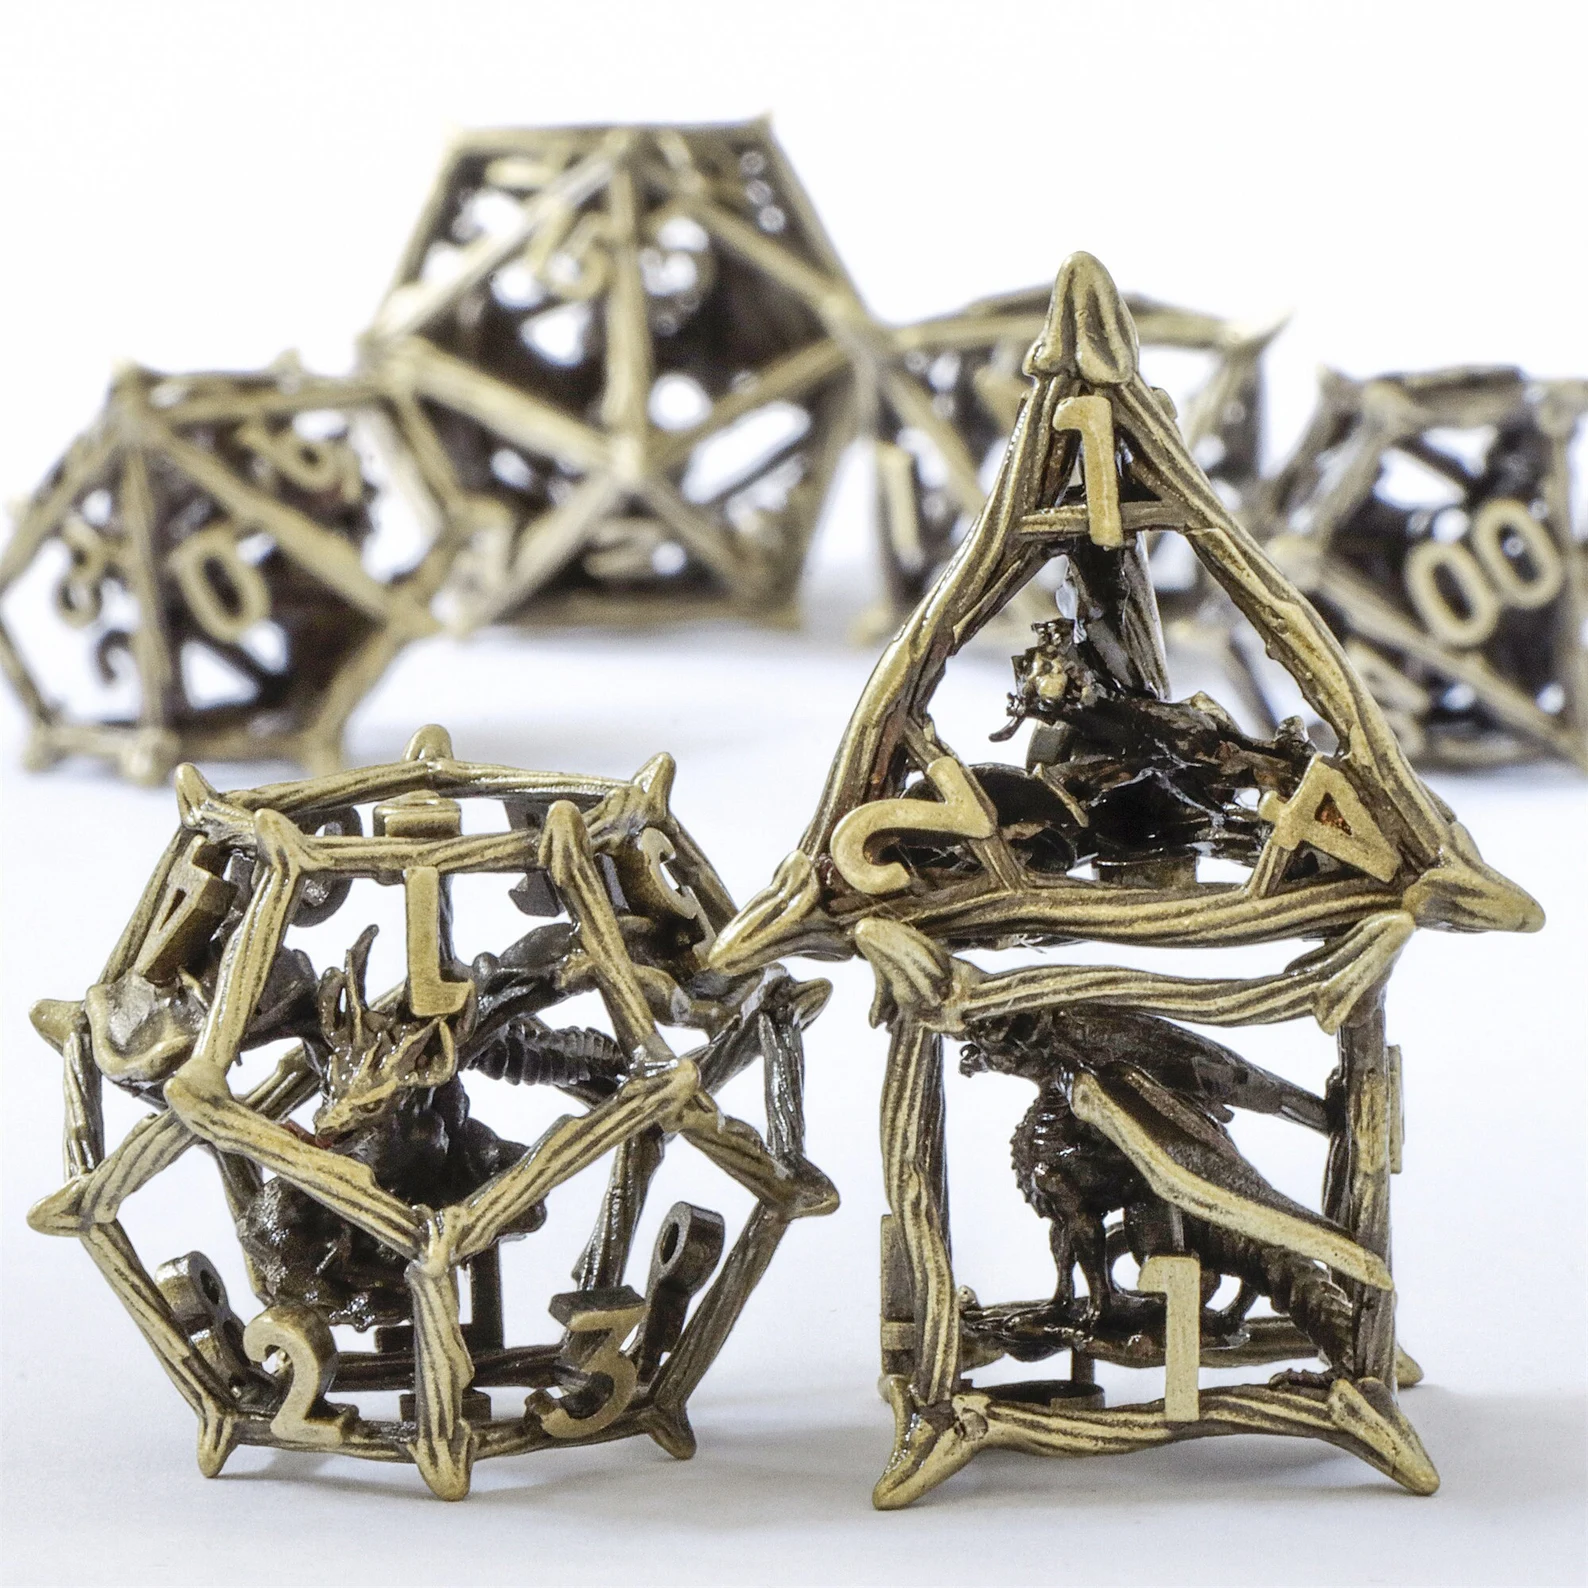 A photo of seven golden hollow metal dice with dragons inside. 